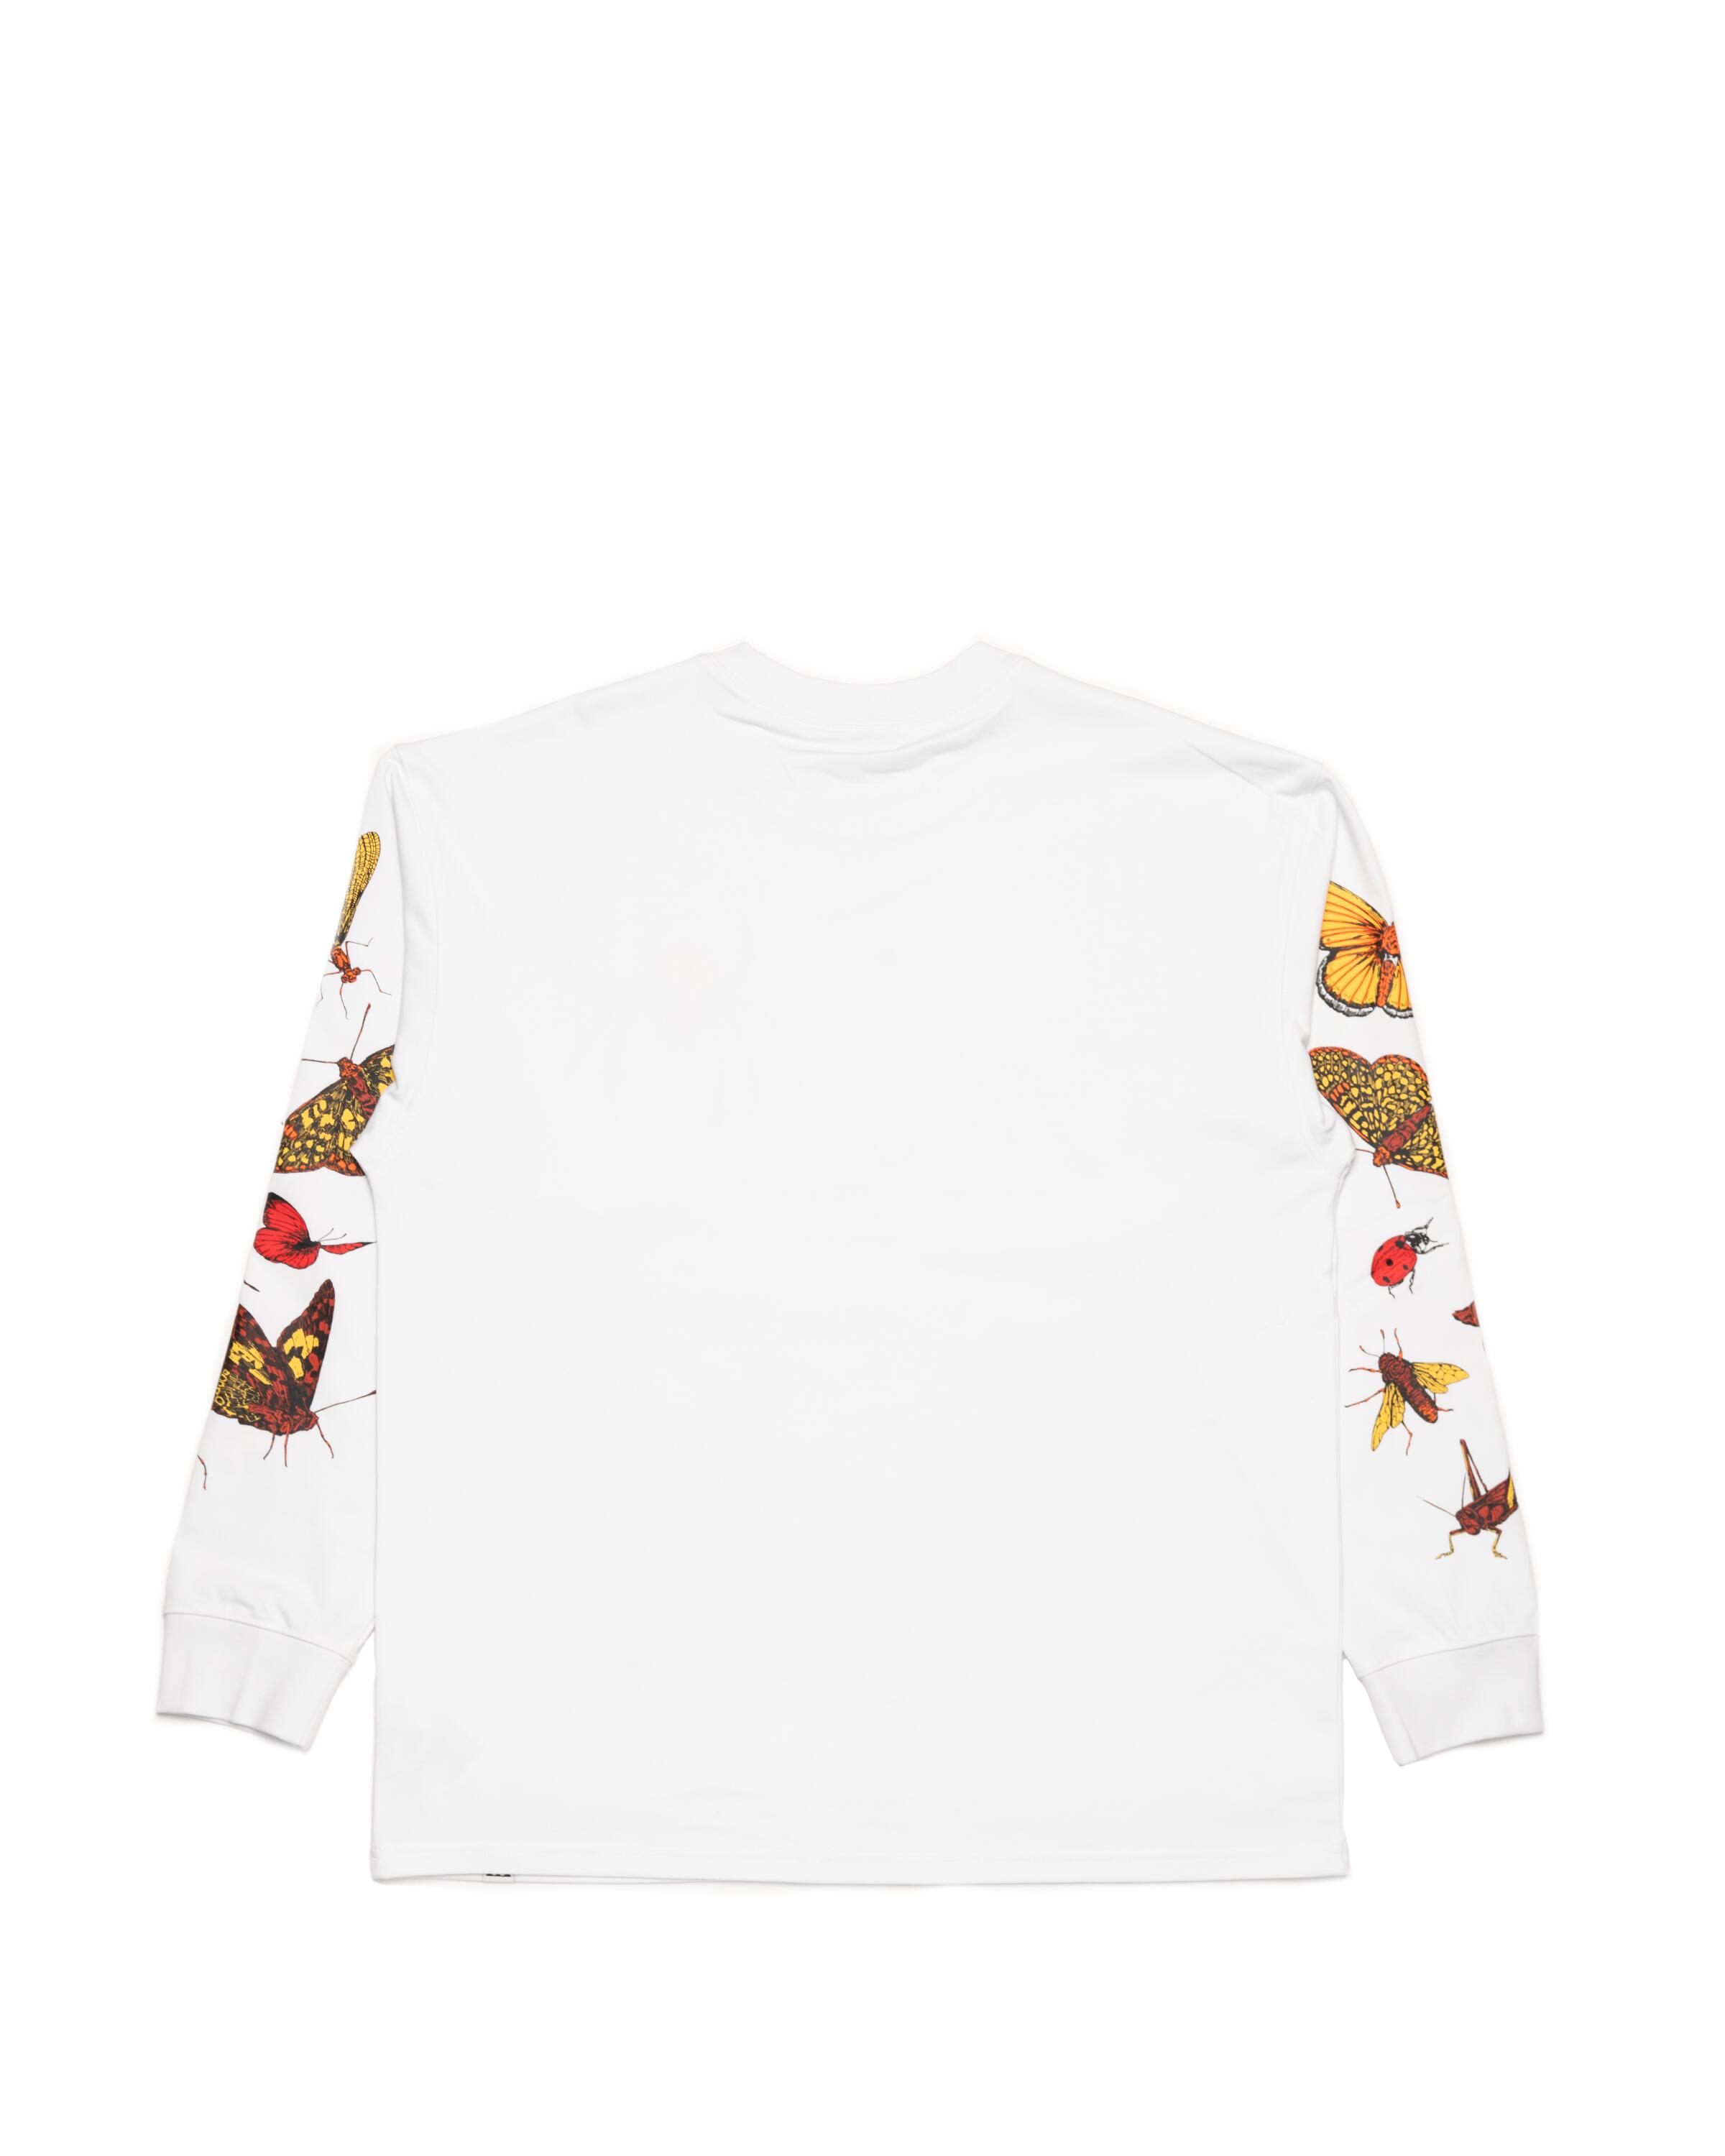 Nike ACG "INSECTS" Long-Sleeve Tee